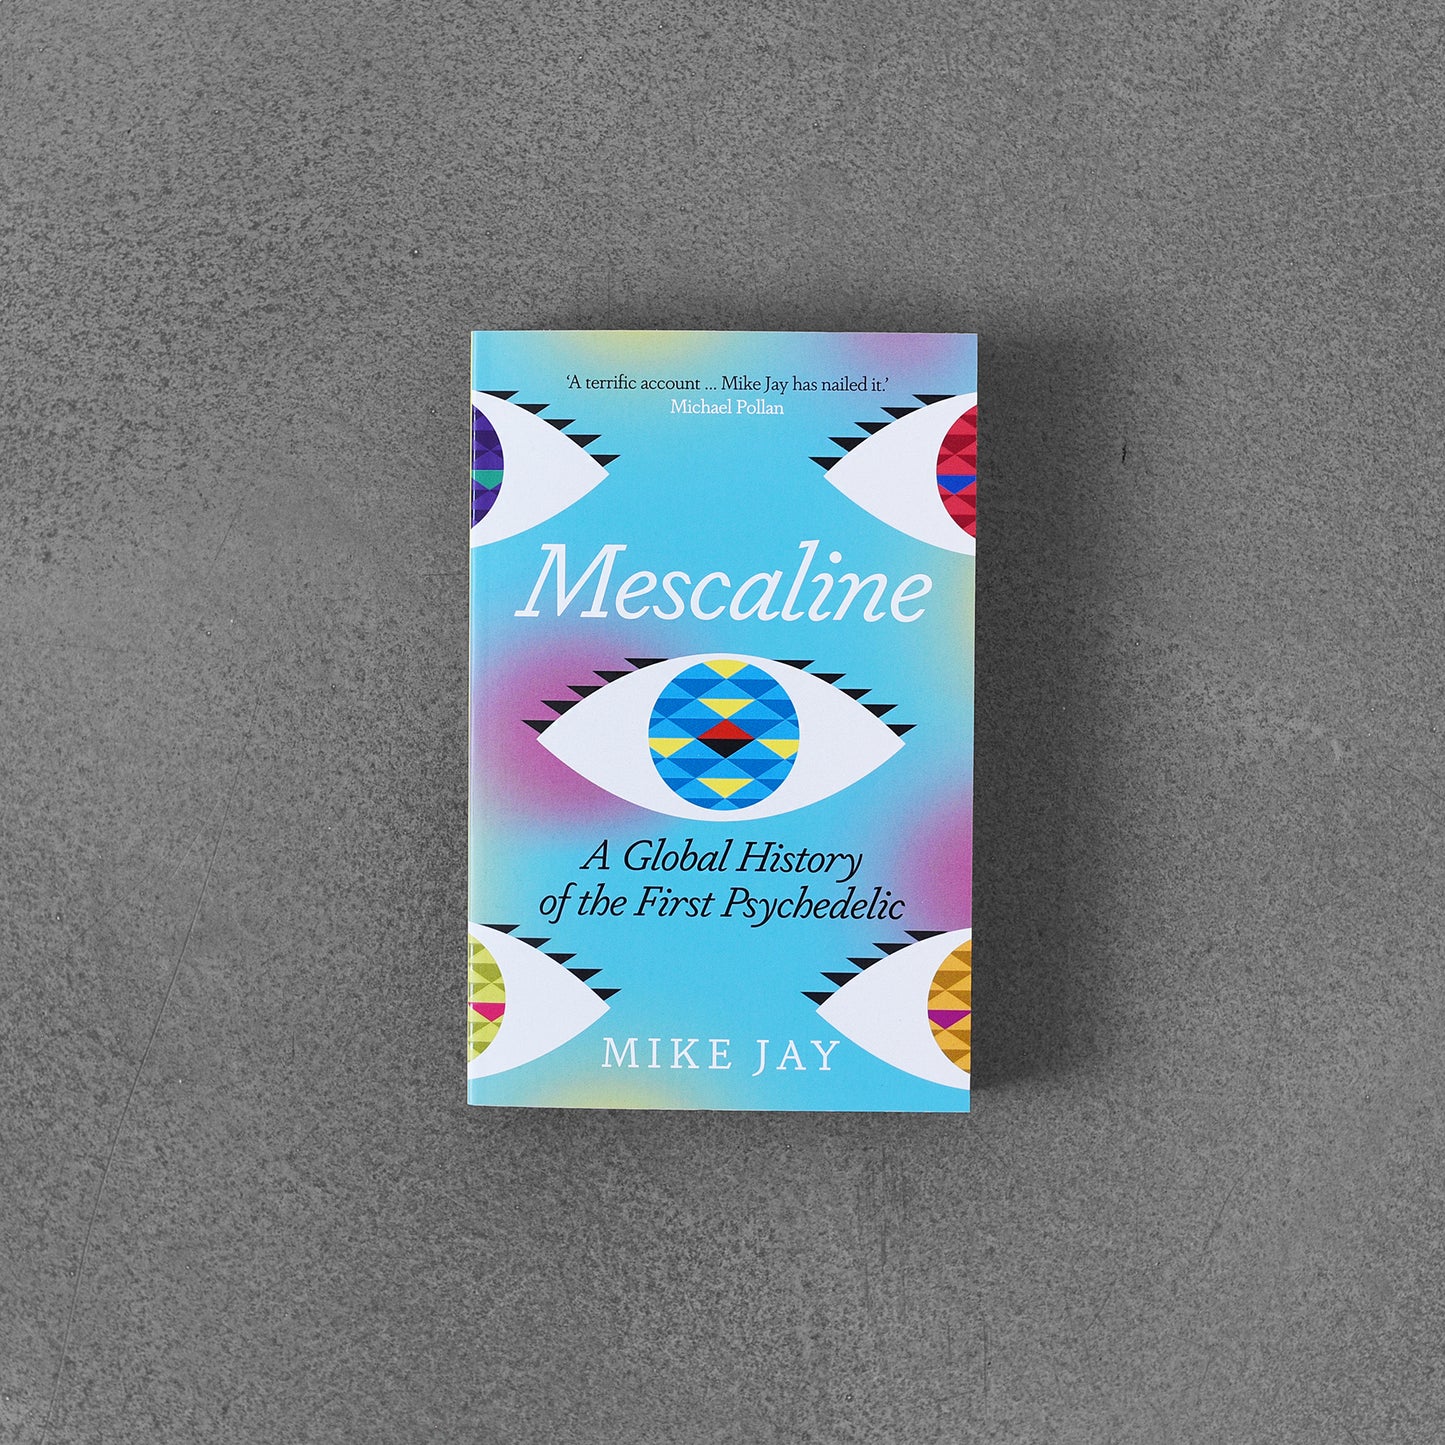 Mescaline : A Global History of the First Psychedelic, MIke Jay